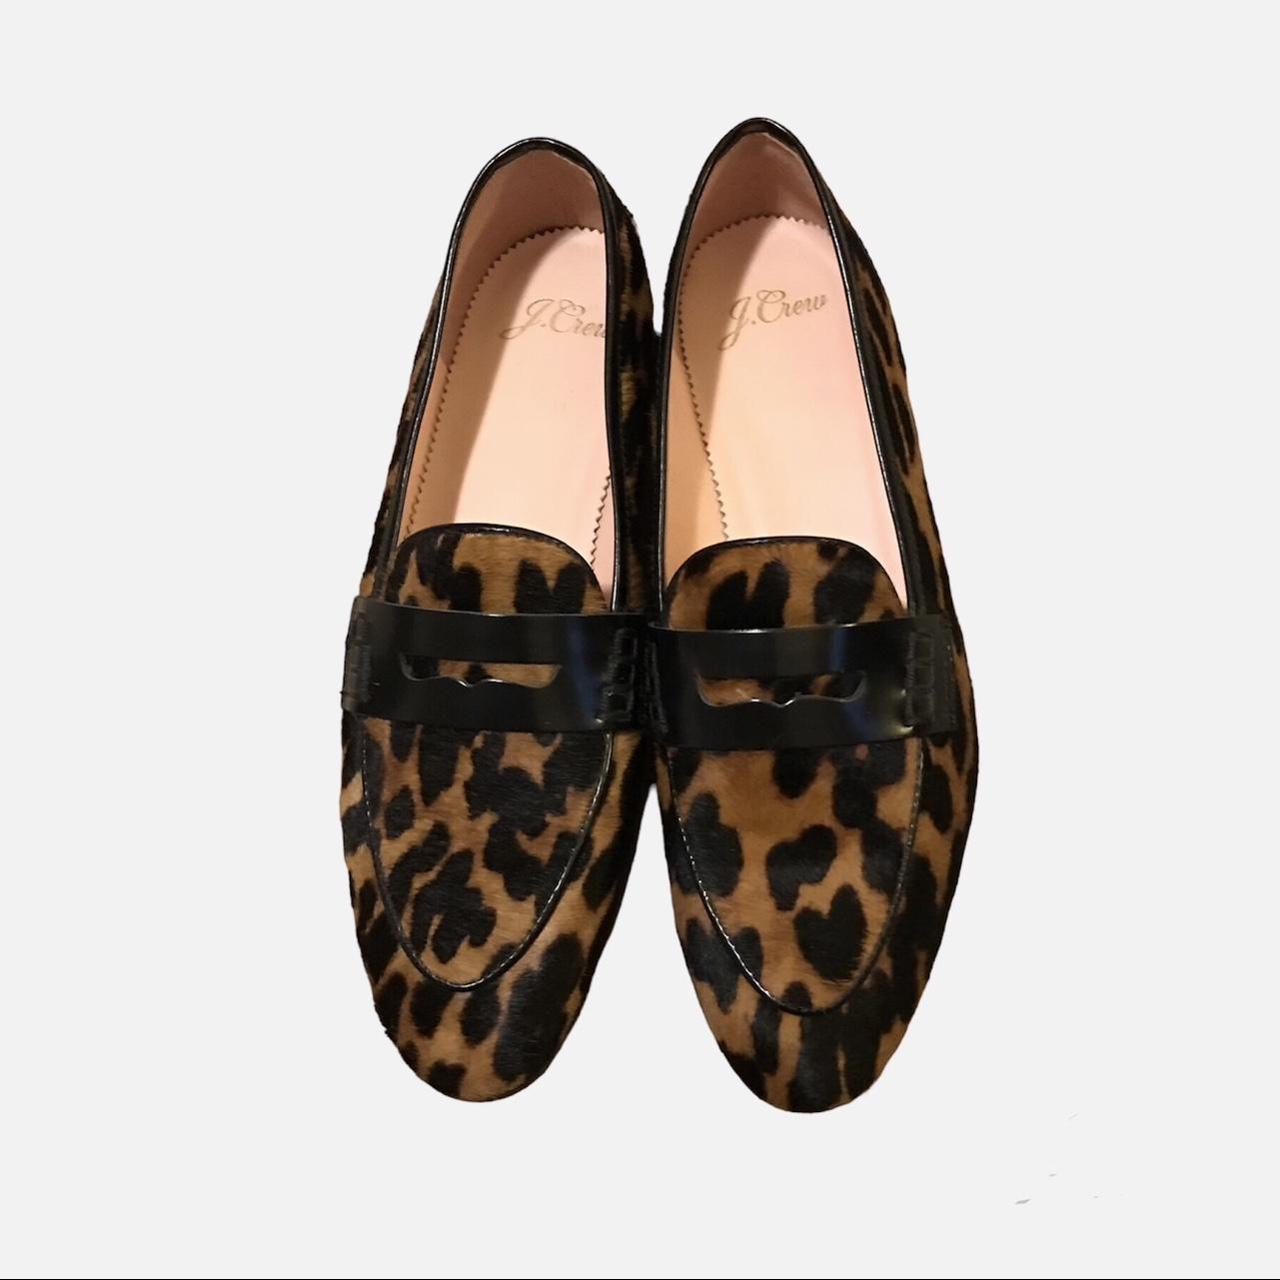 Academy Loafer - Women - Shoes